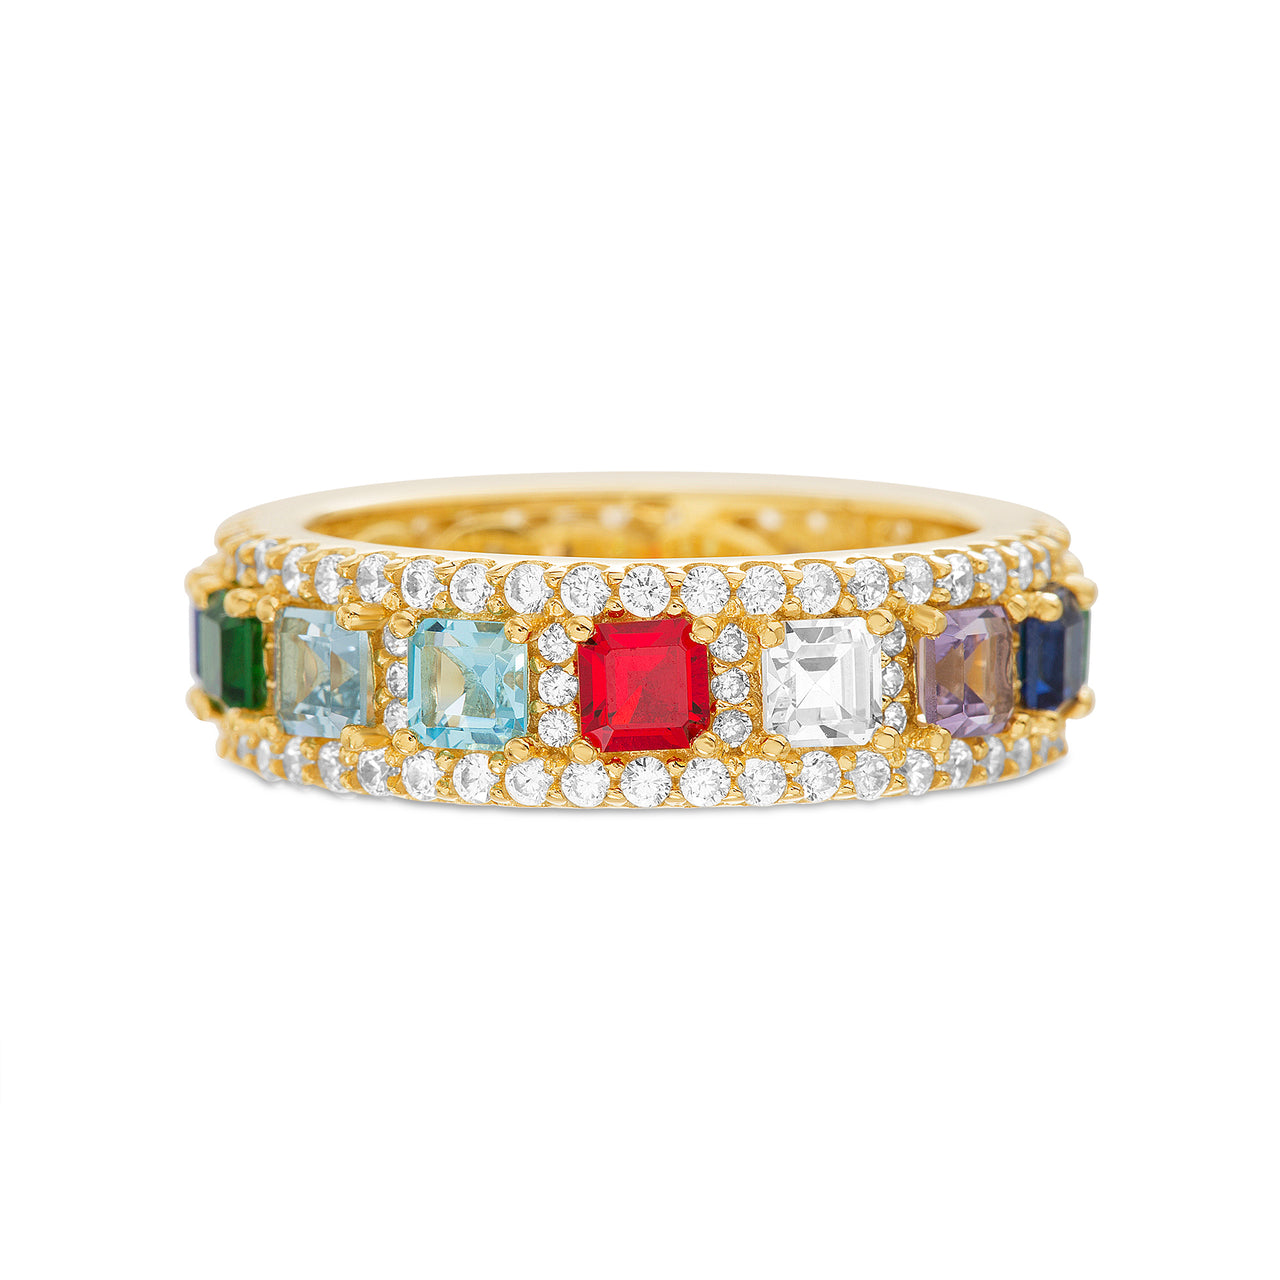 Lesa Michele Rainbow Cubic Zirconia Eternity Band Ring in Yellow Gold Plated Sterling Silver